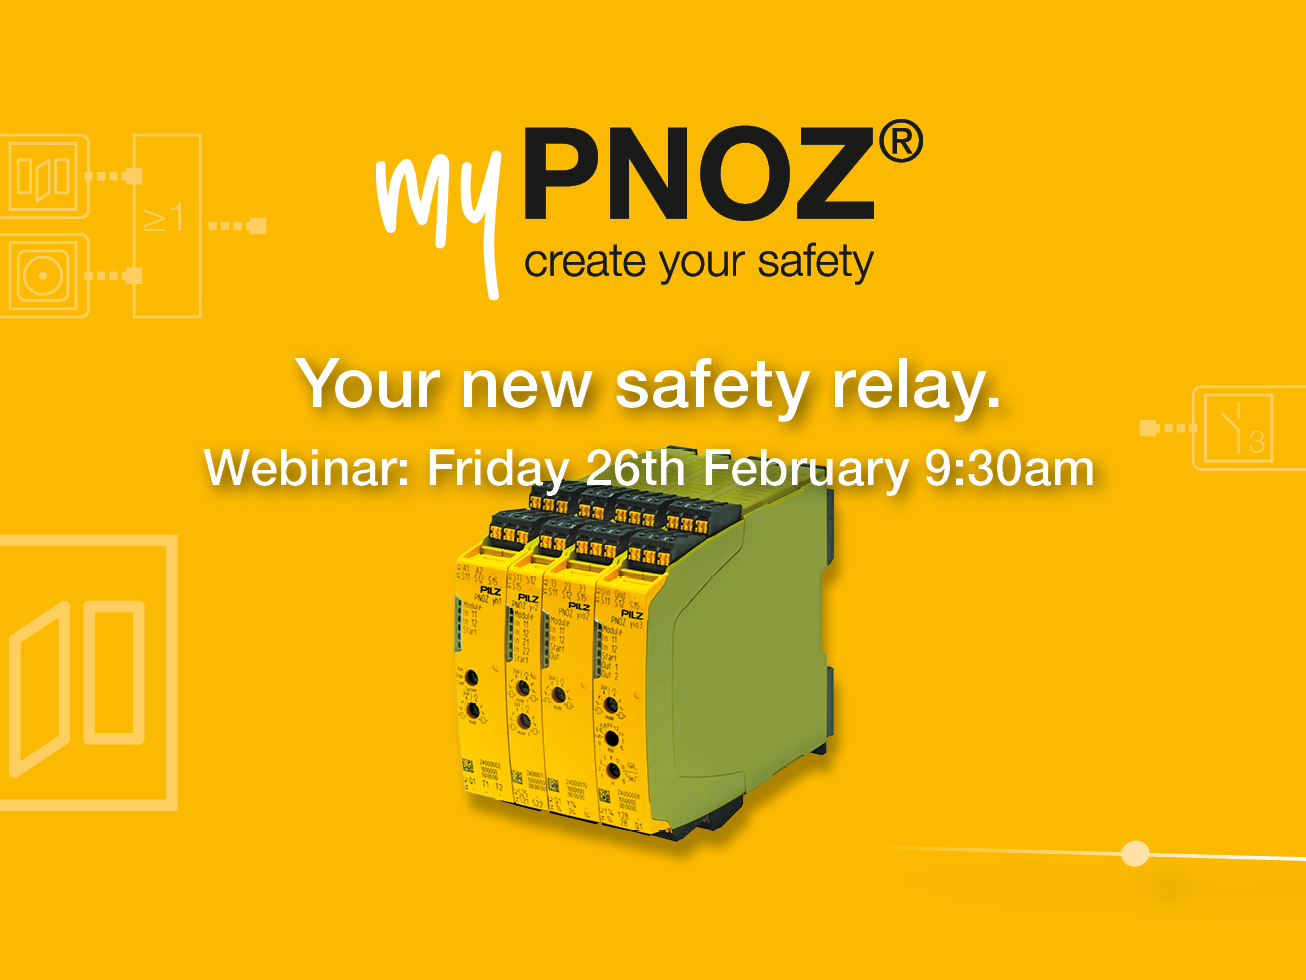 Next free Machinery Safety webinar all lined up